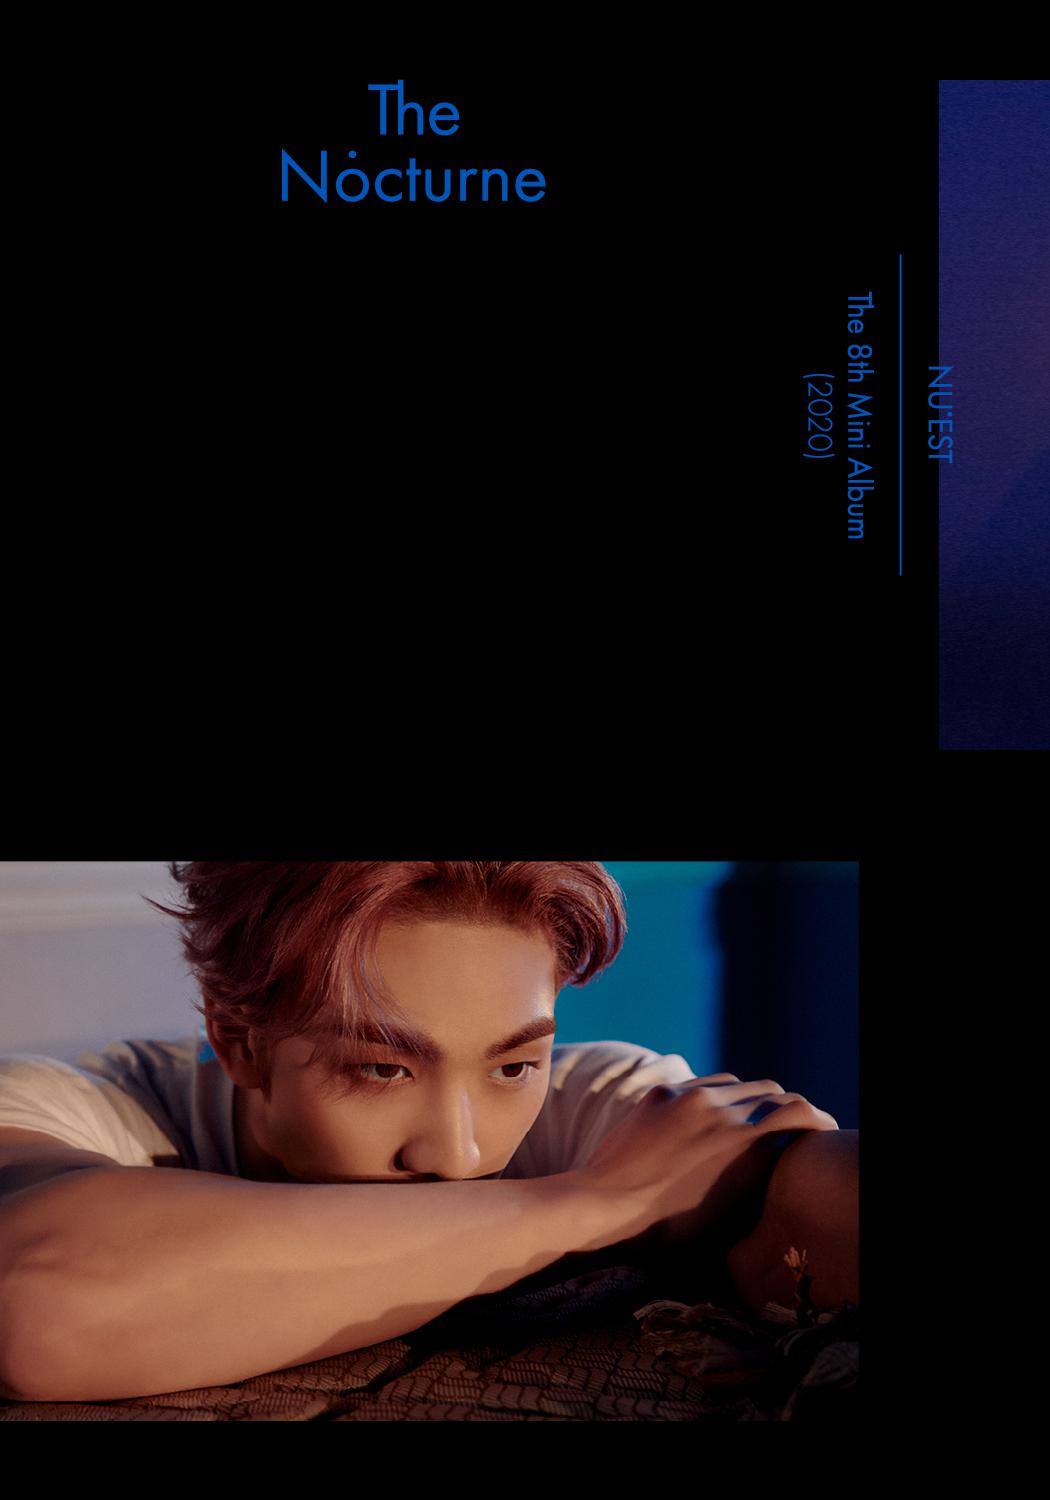 nuest-members-release-the-nocturne-teaser-image-and-trailer-1